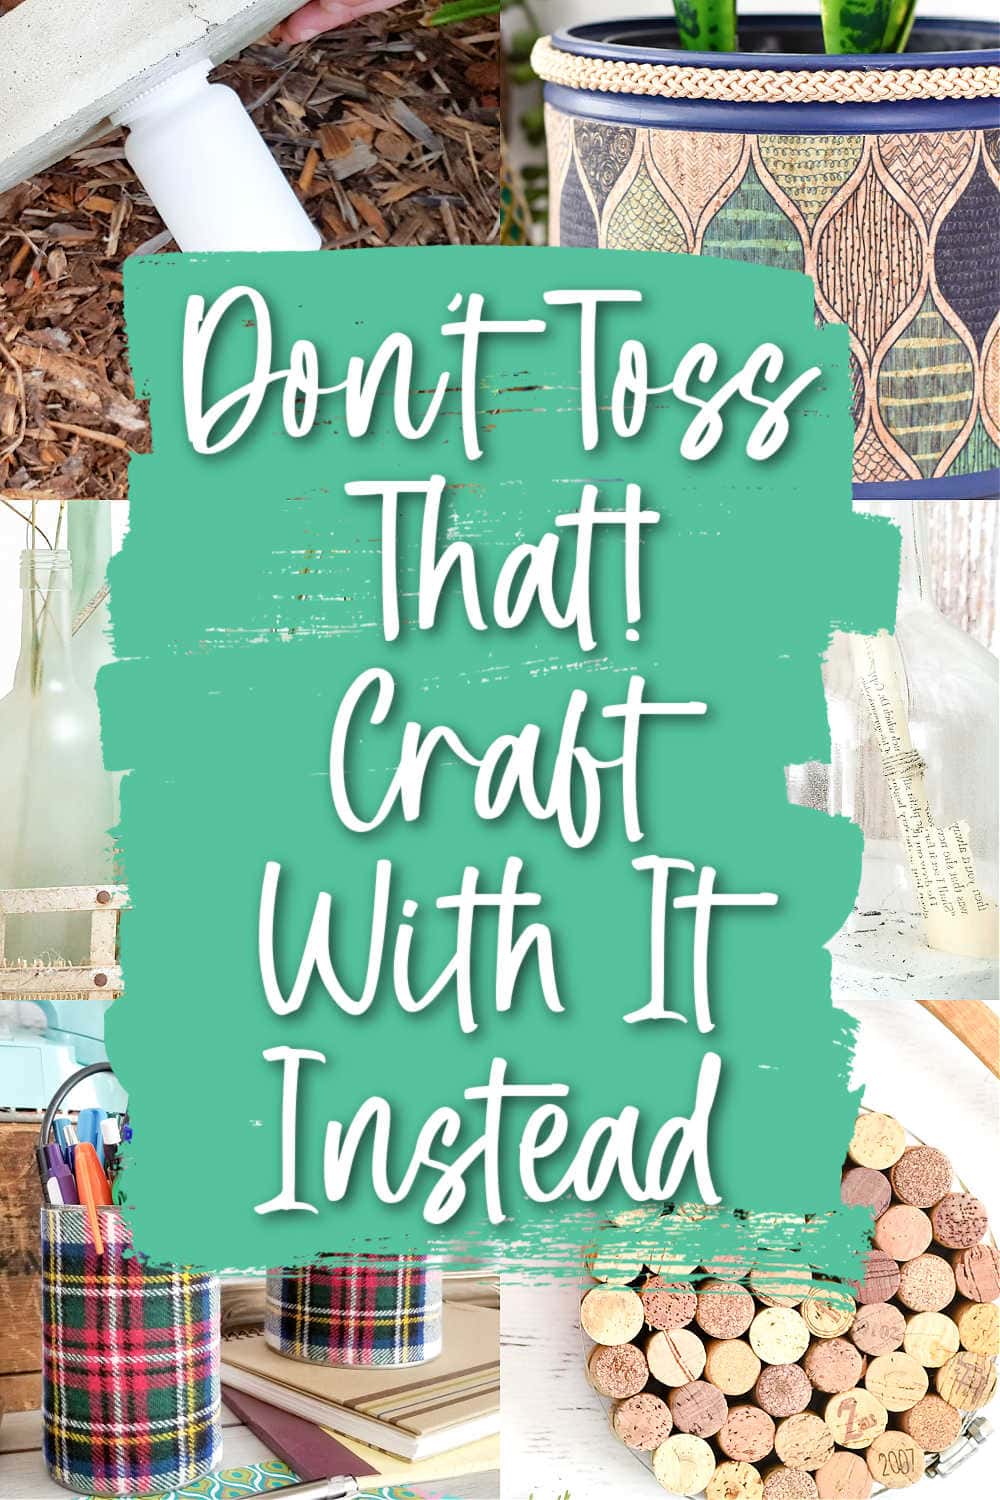 recycled crafts and crafting with trash